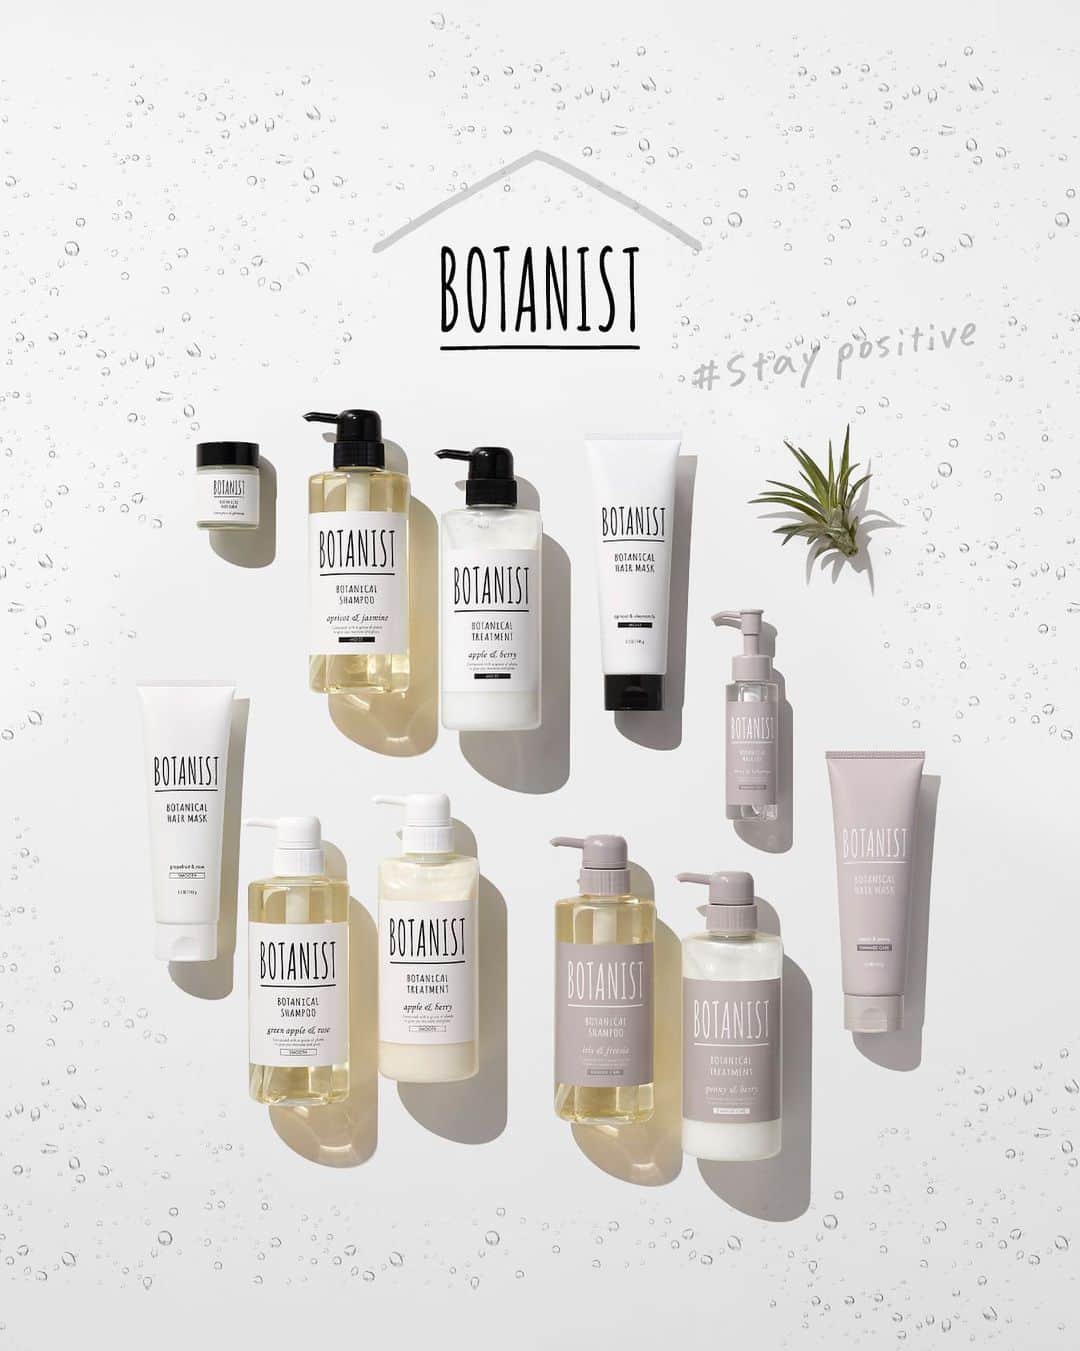 BOTANIST GLOBALのインスタグラム：「Comfortable for your life. ⠀⠀⠀ Spend time at home with #BOTANIST and have fun. Pick your favorite things from the abundance of everyday life and #staypositive!  Stay Simple. Live Simple. #BOTANIST ⠀  🛀@botanist_official 🗼@botanist_tokyo 🇨🇳@botanist_chinese」